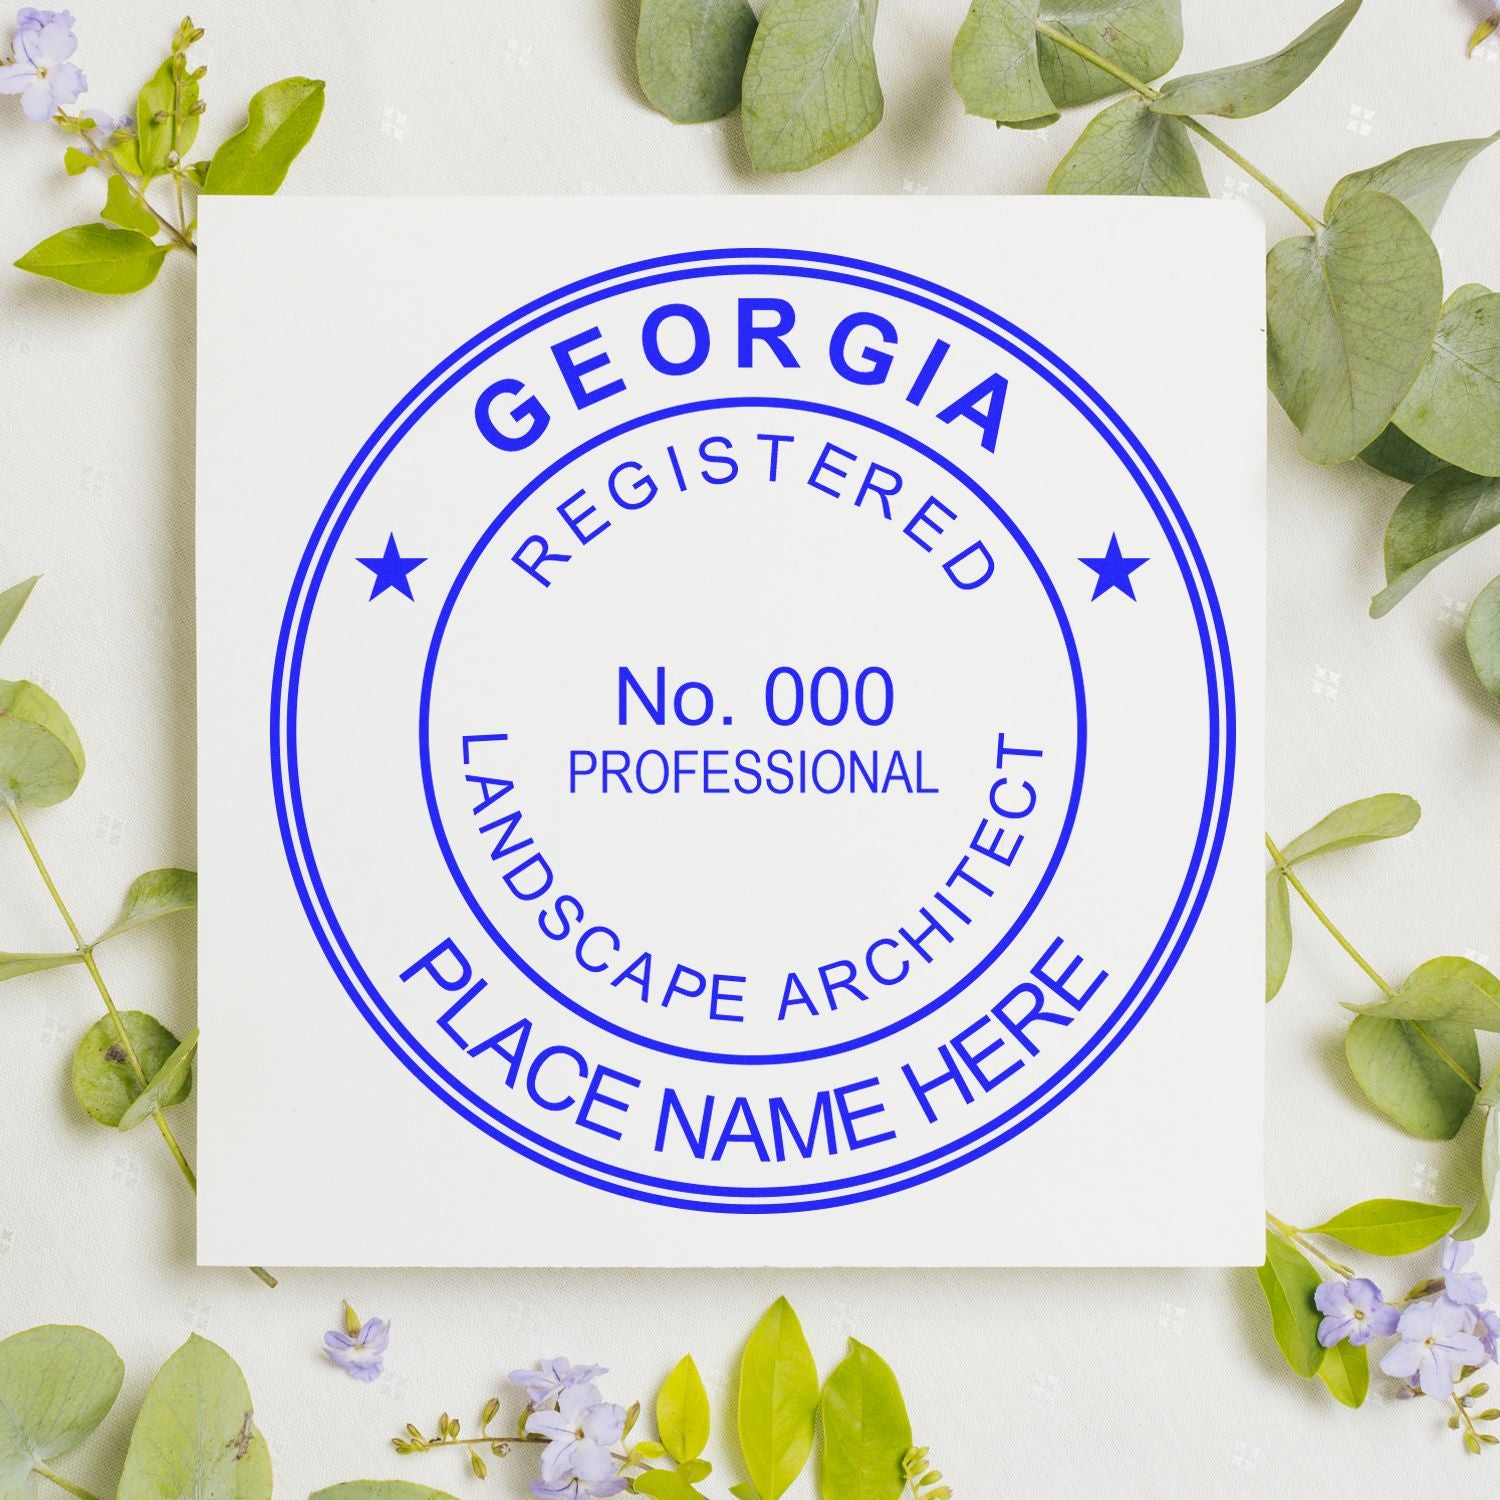 Rise Above the Rest: The Professional Landscape Architect Stamp in Georgia Unveiled Feature Image